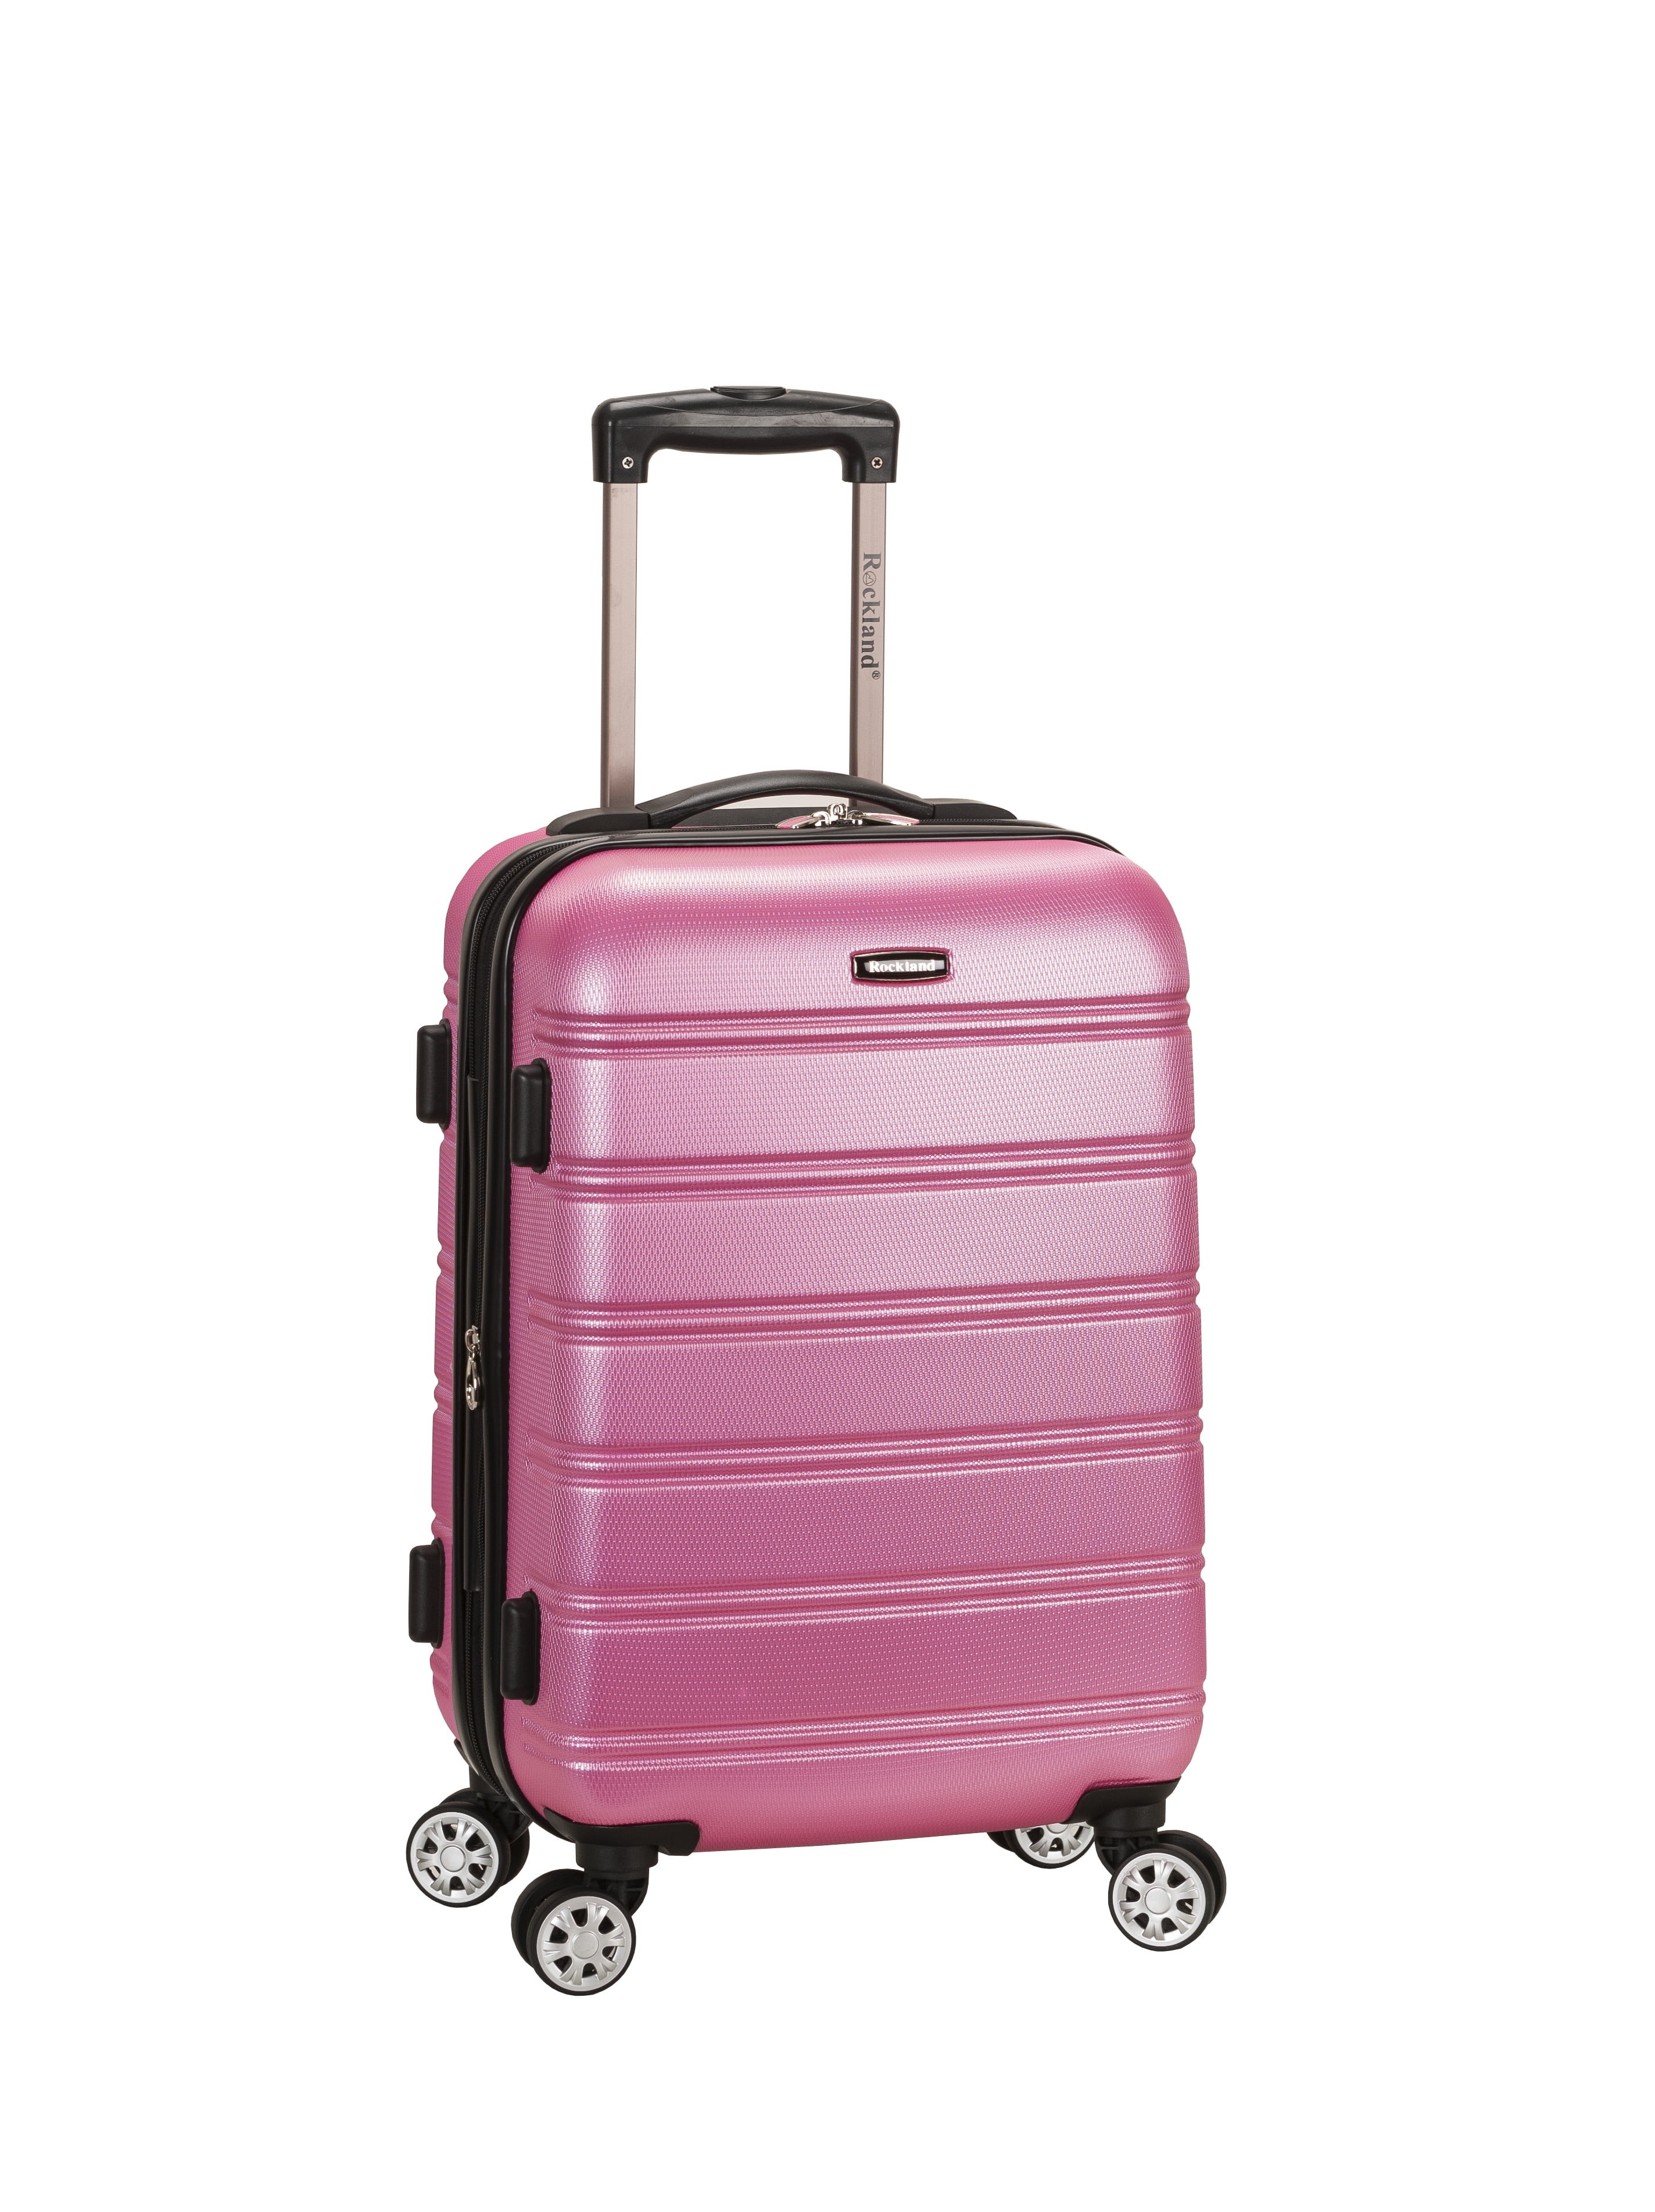 Rockland Luggage F145 Melbourne 20 in. Expandable ABS Carry On Luggage ...